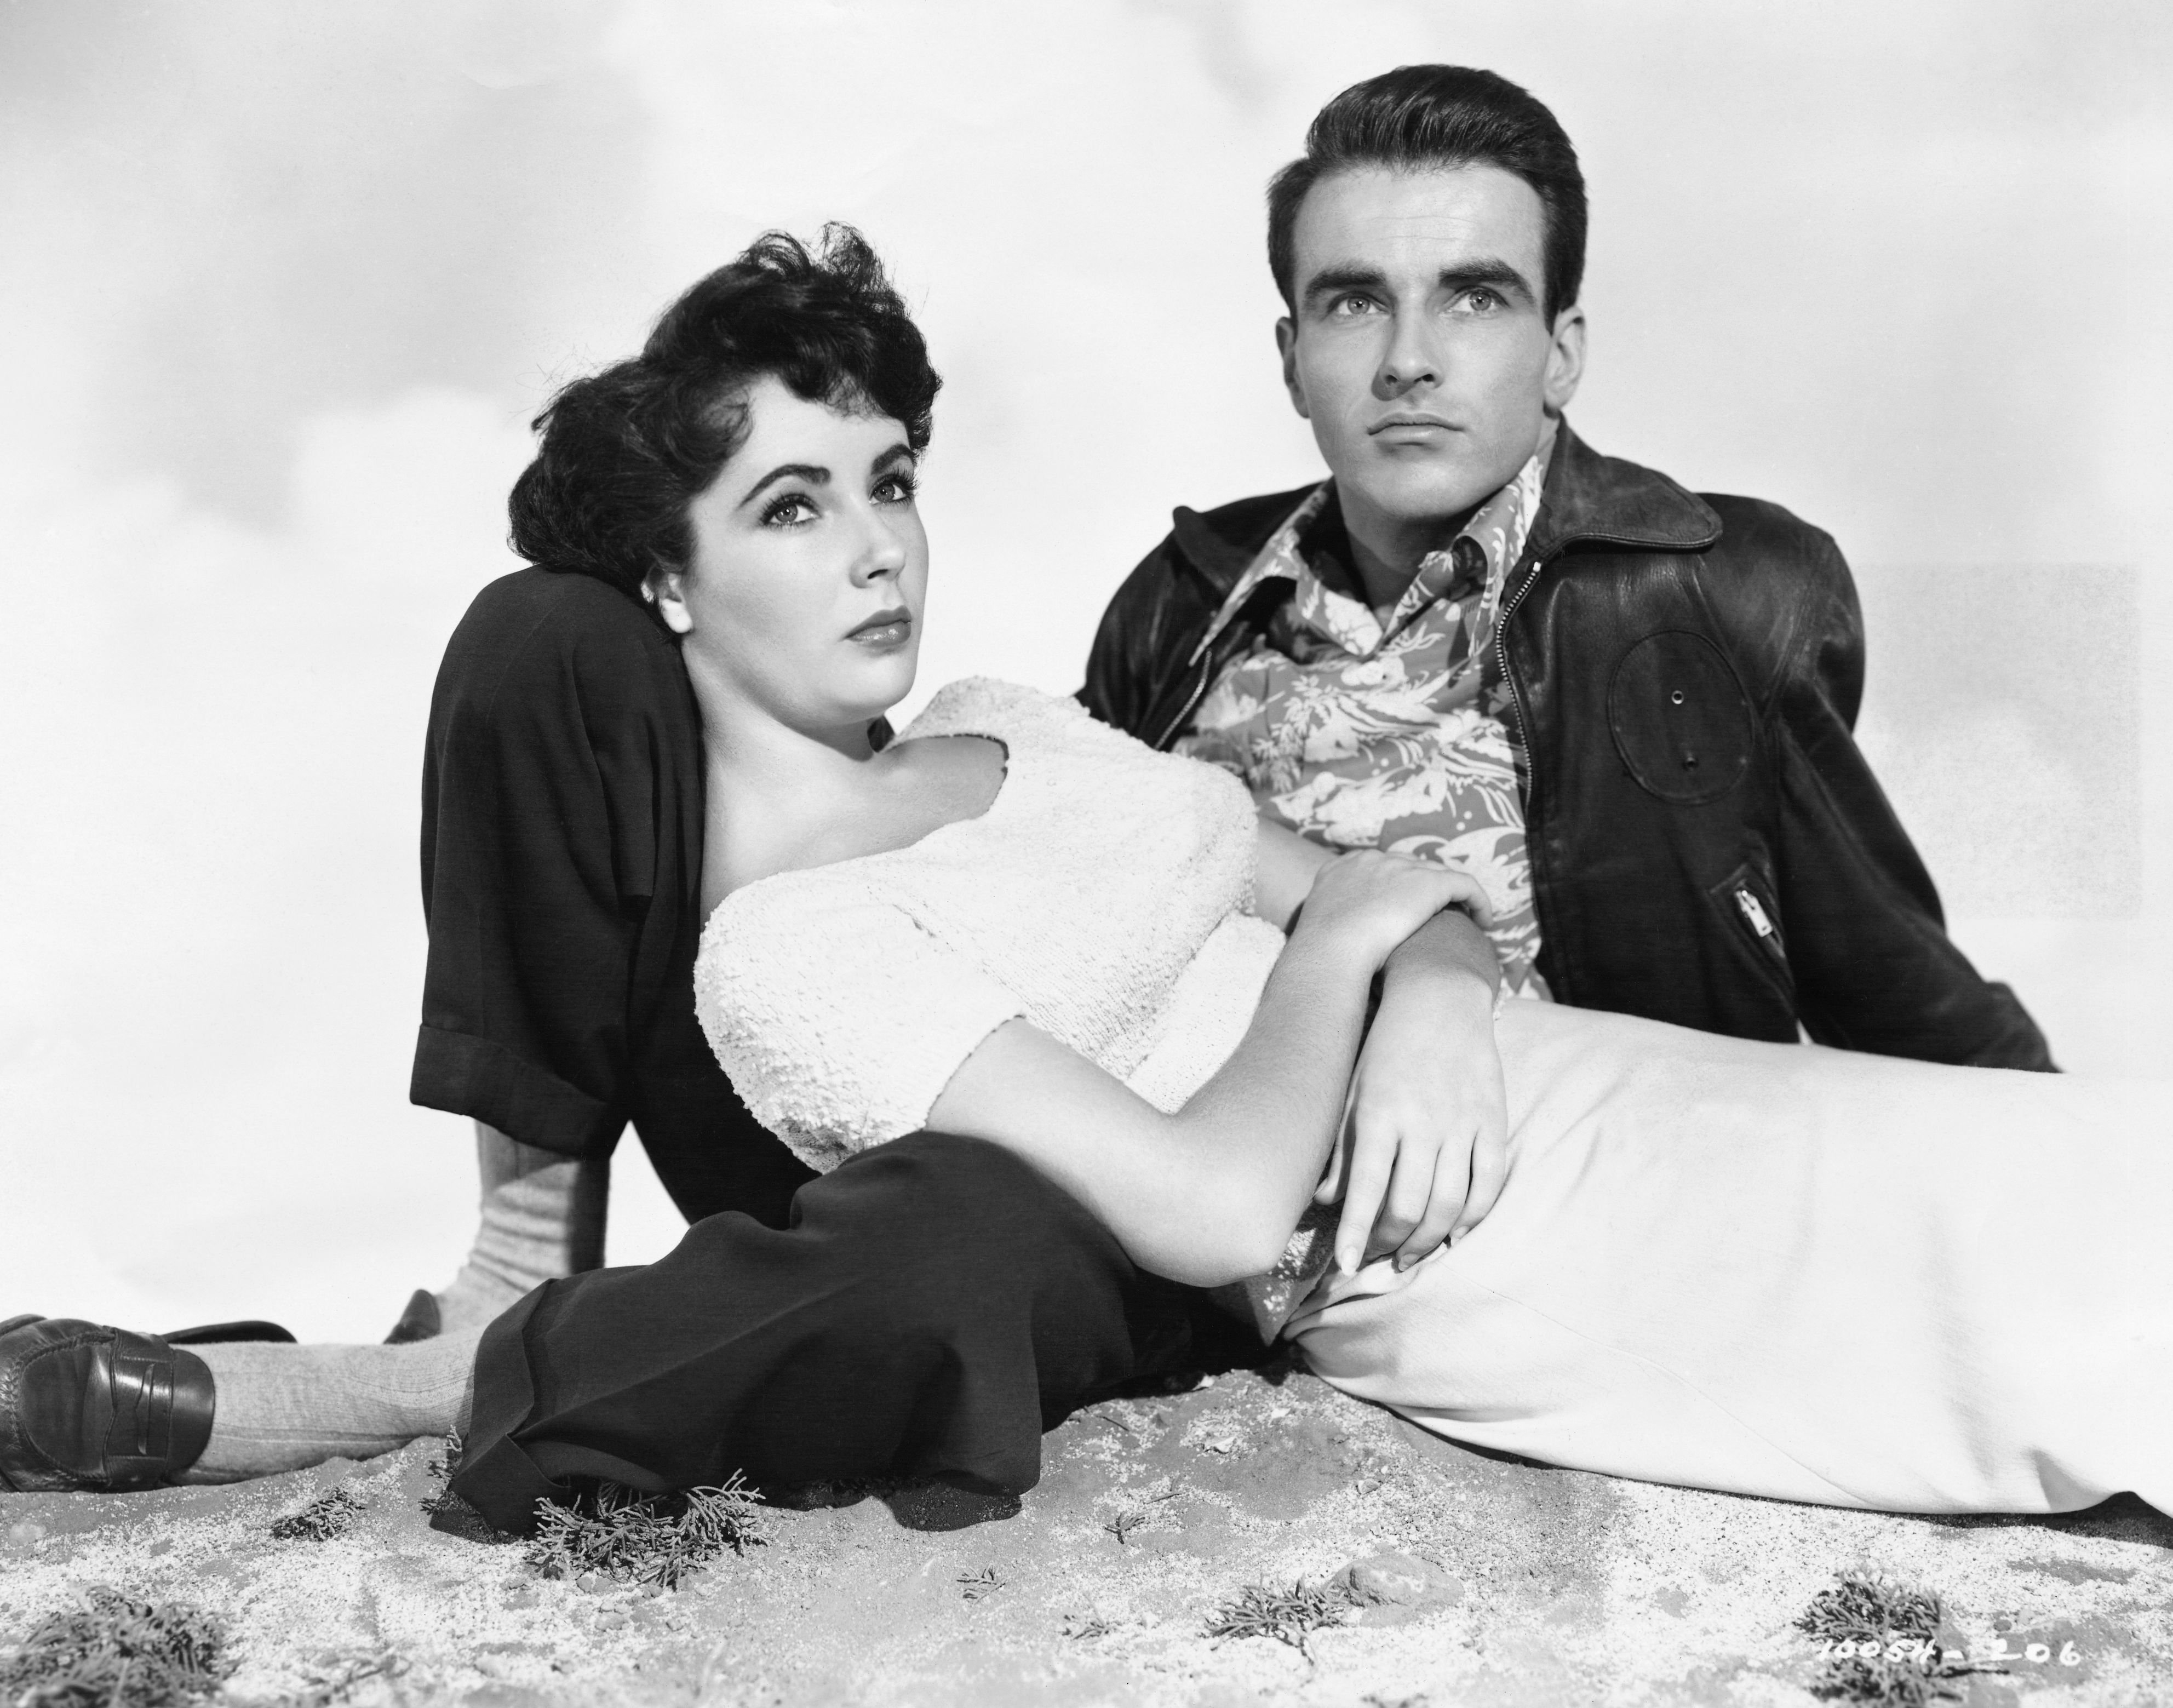 Elizabeth Taylor and Montgomery Clift  in the 1951 film "A Place in the Sun" on  01 January, 1951 | Photo: Getty Images